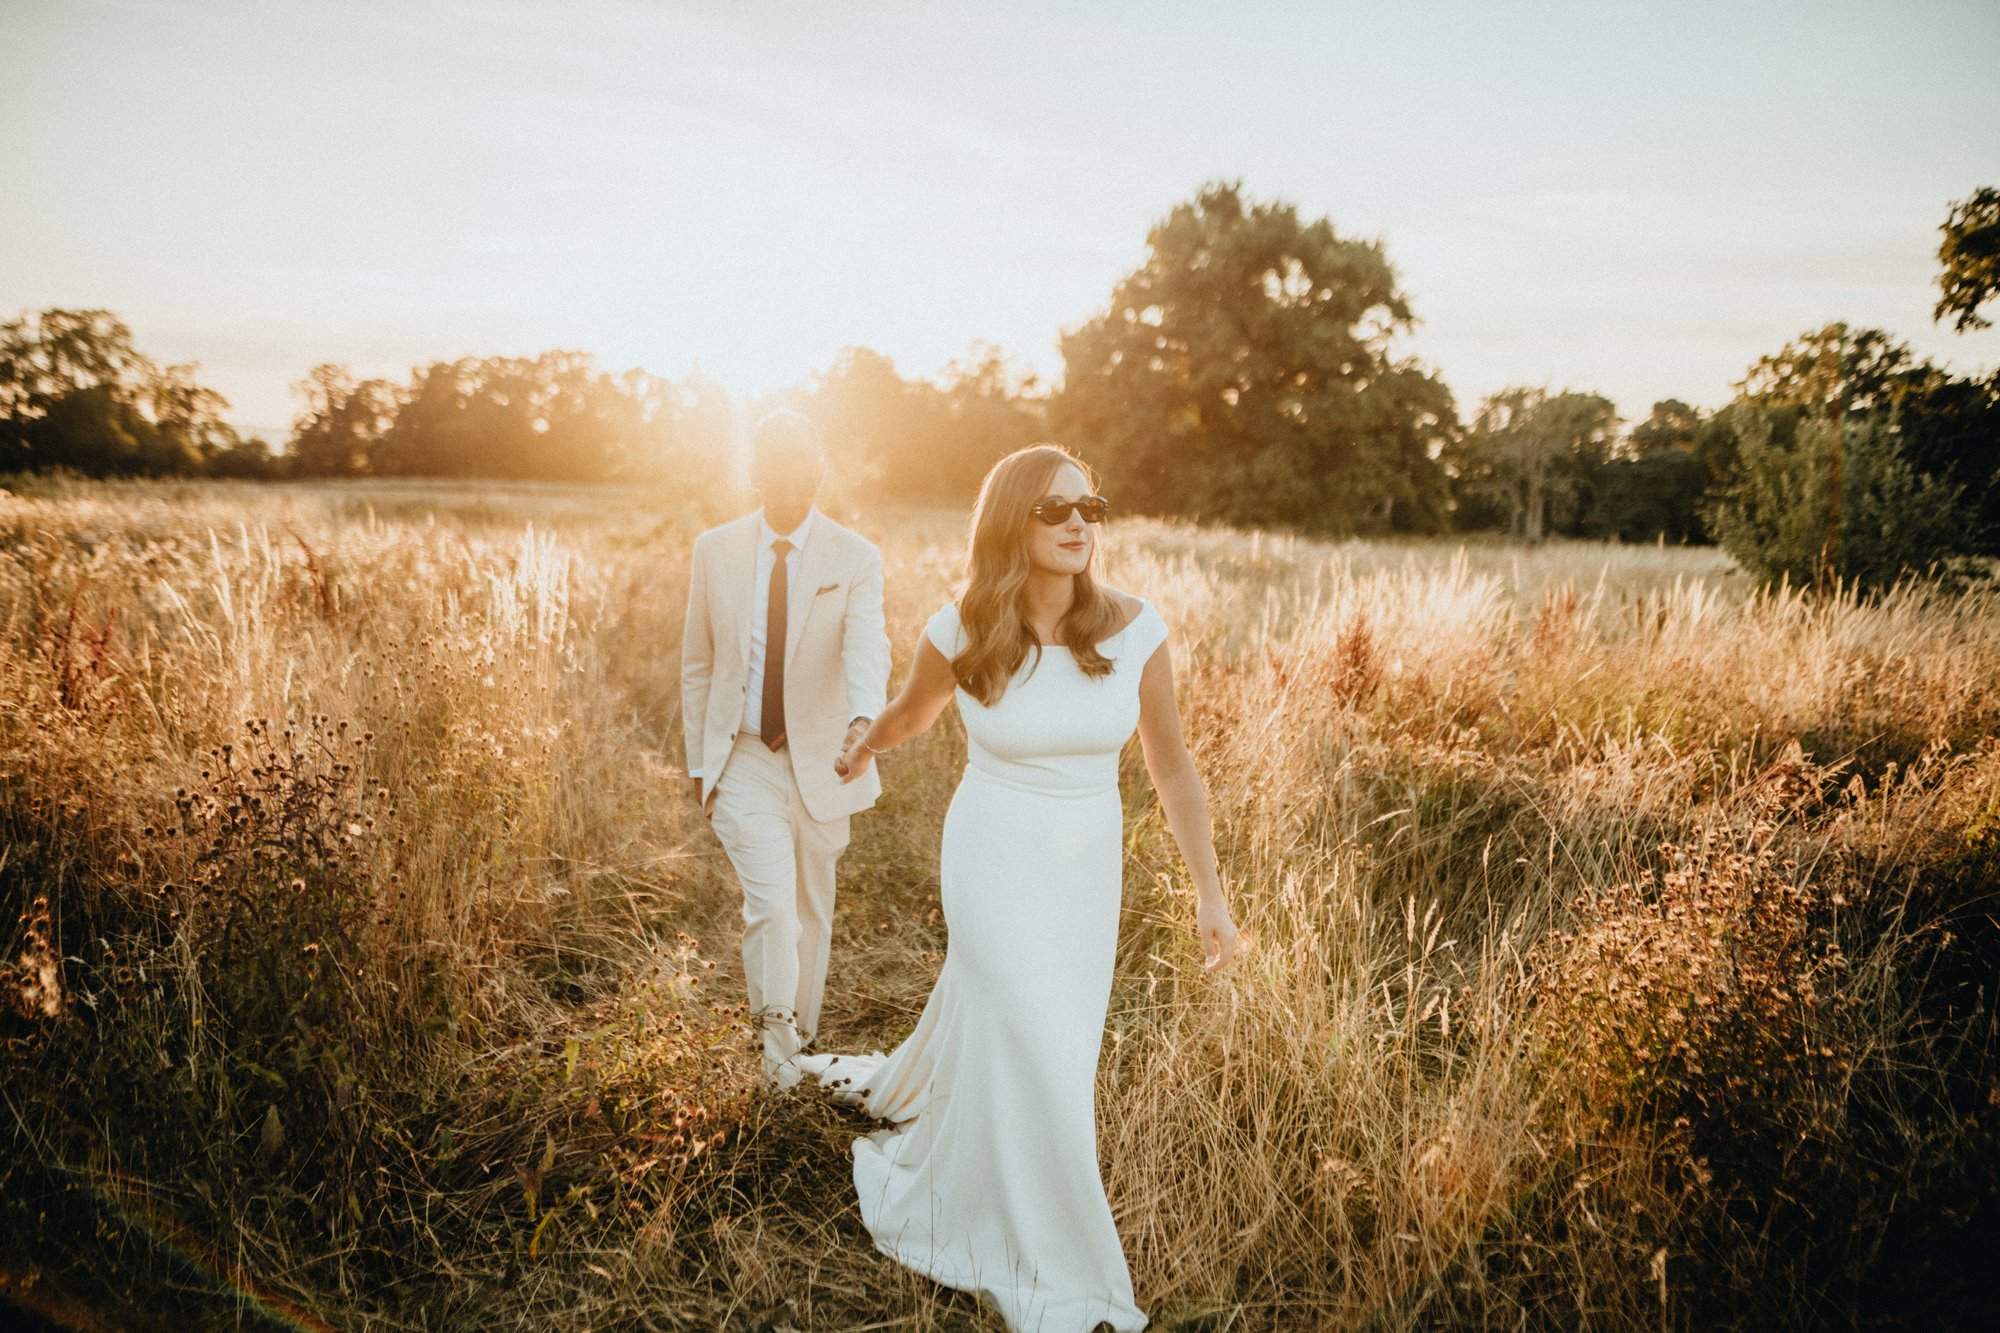 Cool bride and groom wearing sunglasses while walking through a meadow at sunset